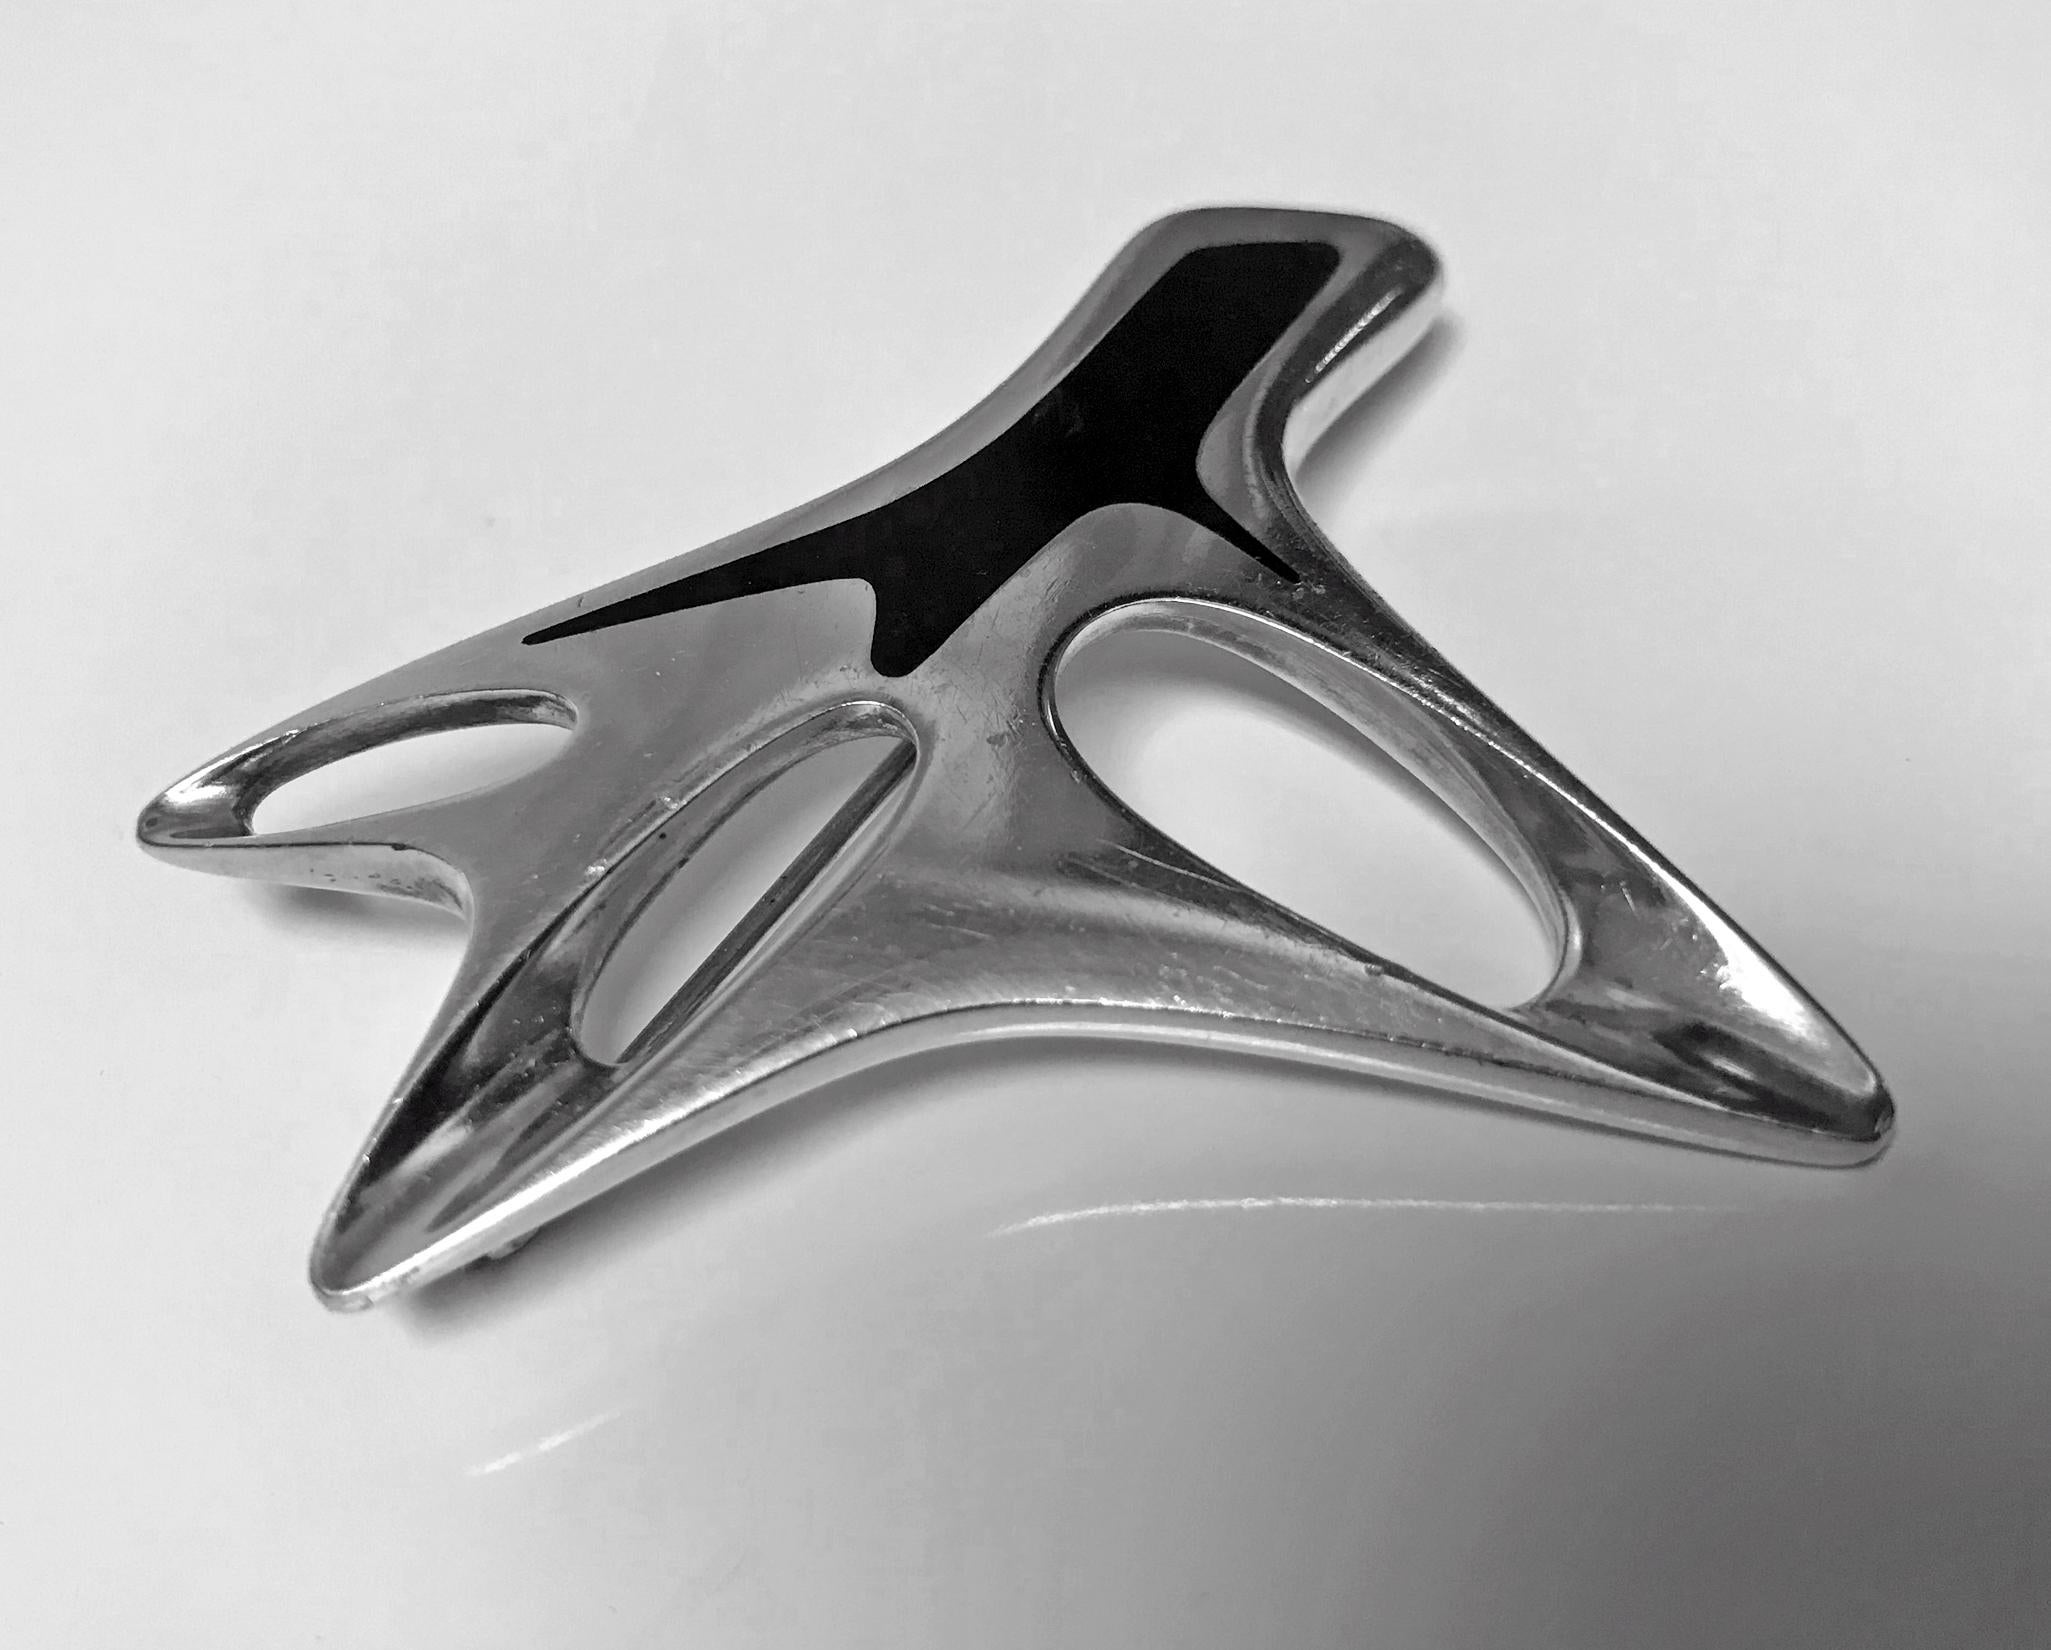 Georg Jensen Sterling Silver Abstract Brooch with Black Enamel No 323 - Henning Koppel. Designed by Henning Koppel 1918 - 1981. Stamped with post-1945 GJ Hallmarks and HK initials. Measures: 2.50 x 2.25 inches. Weight: 34.85 grams. Extreme minor